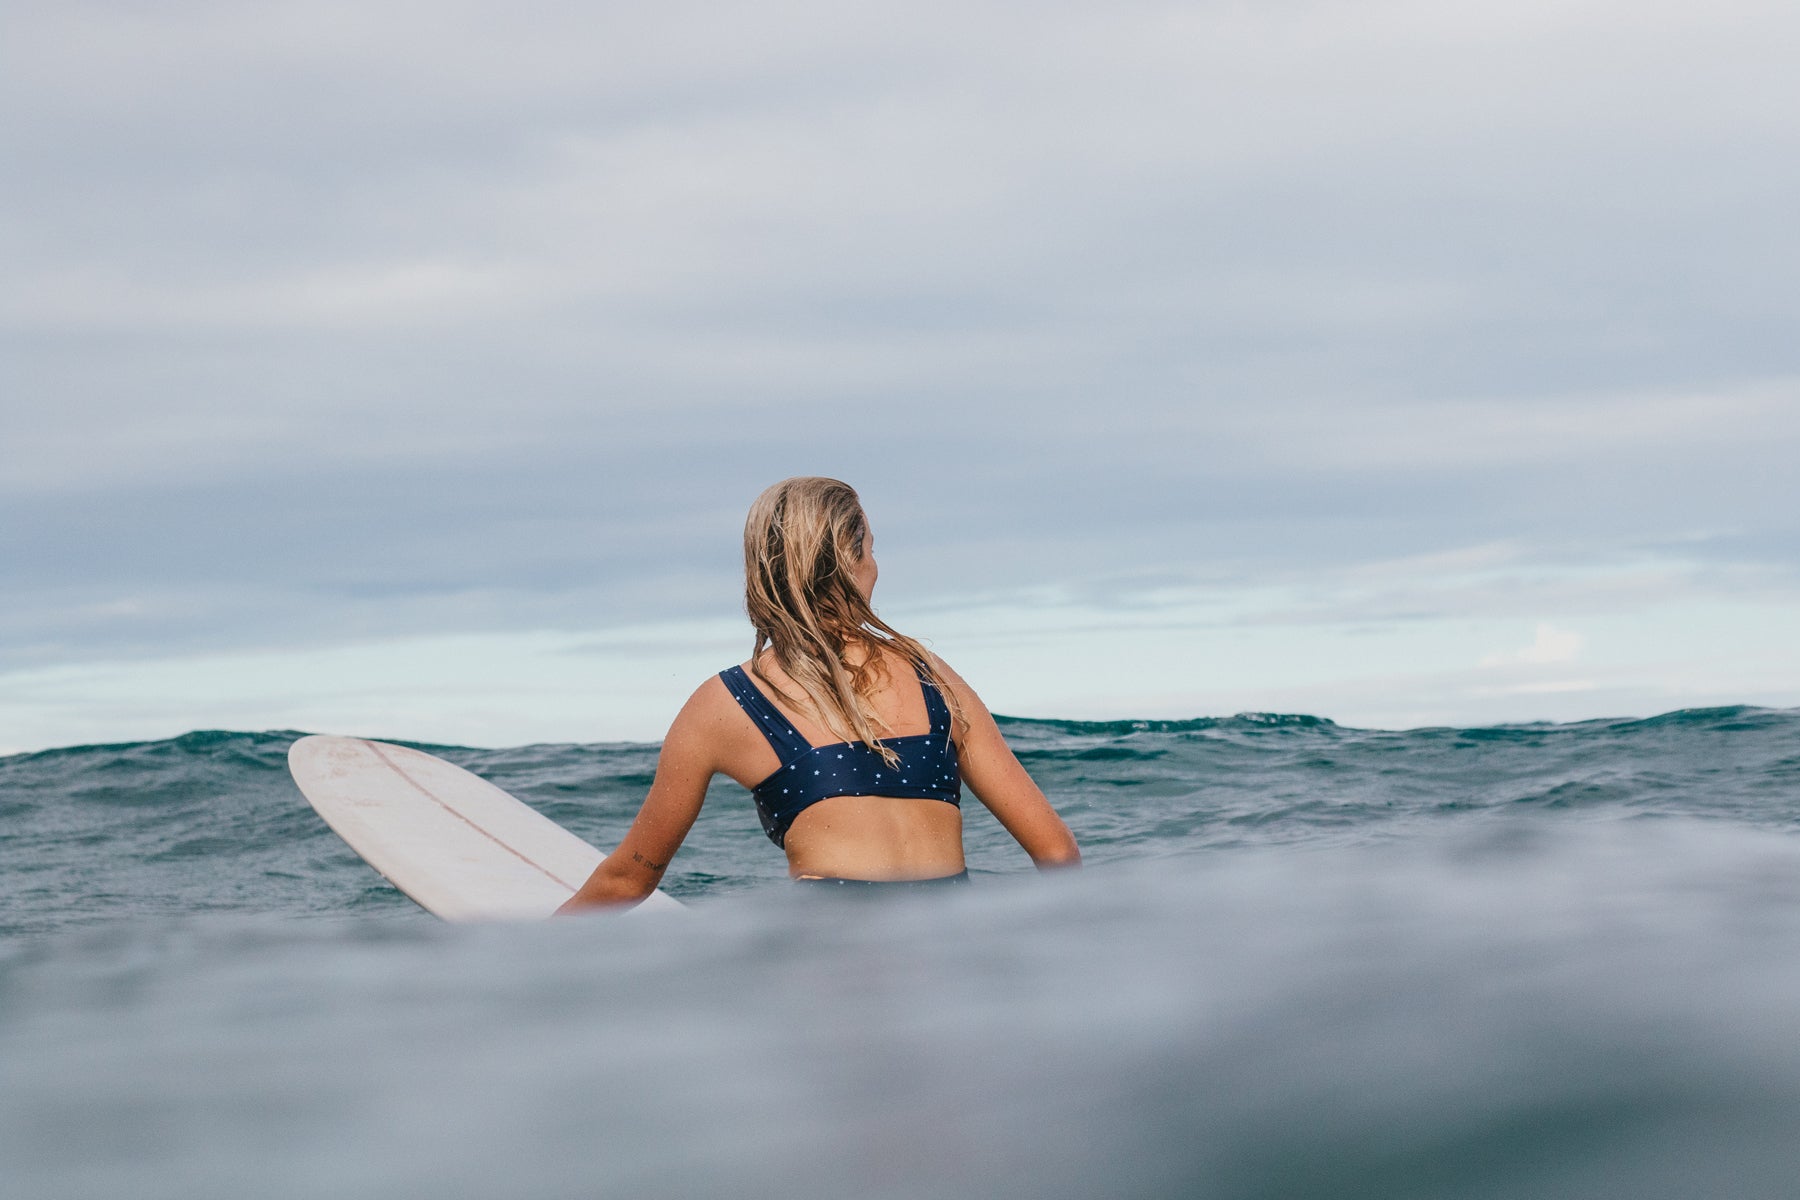 Introducing our new Luna Surf Crop